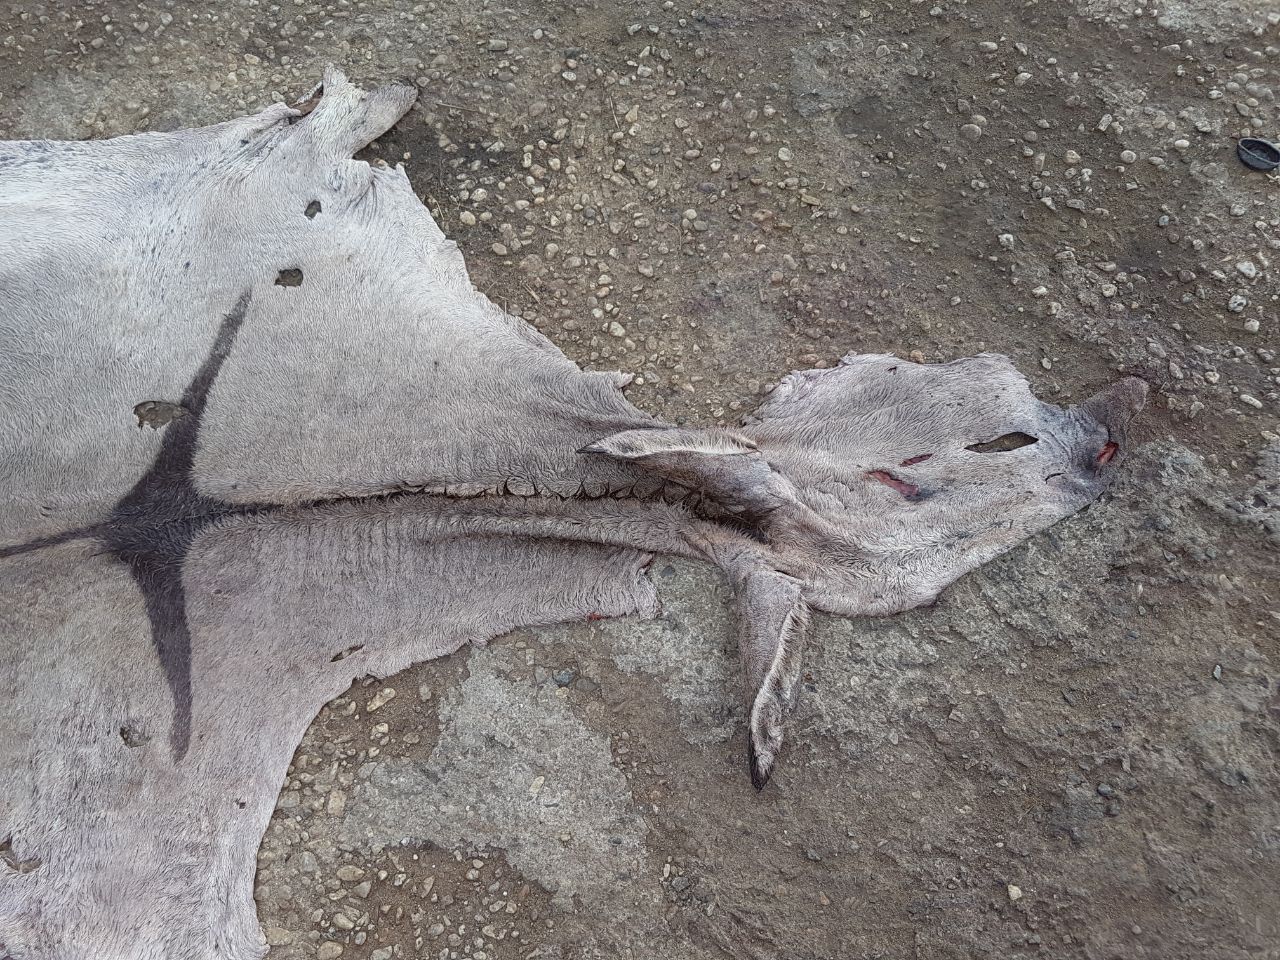 wet salted donkey hides / Cameroon